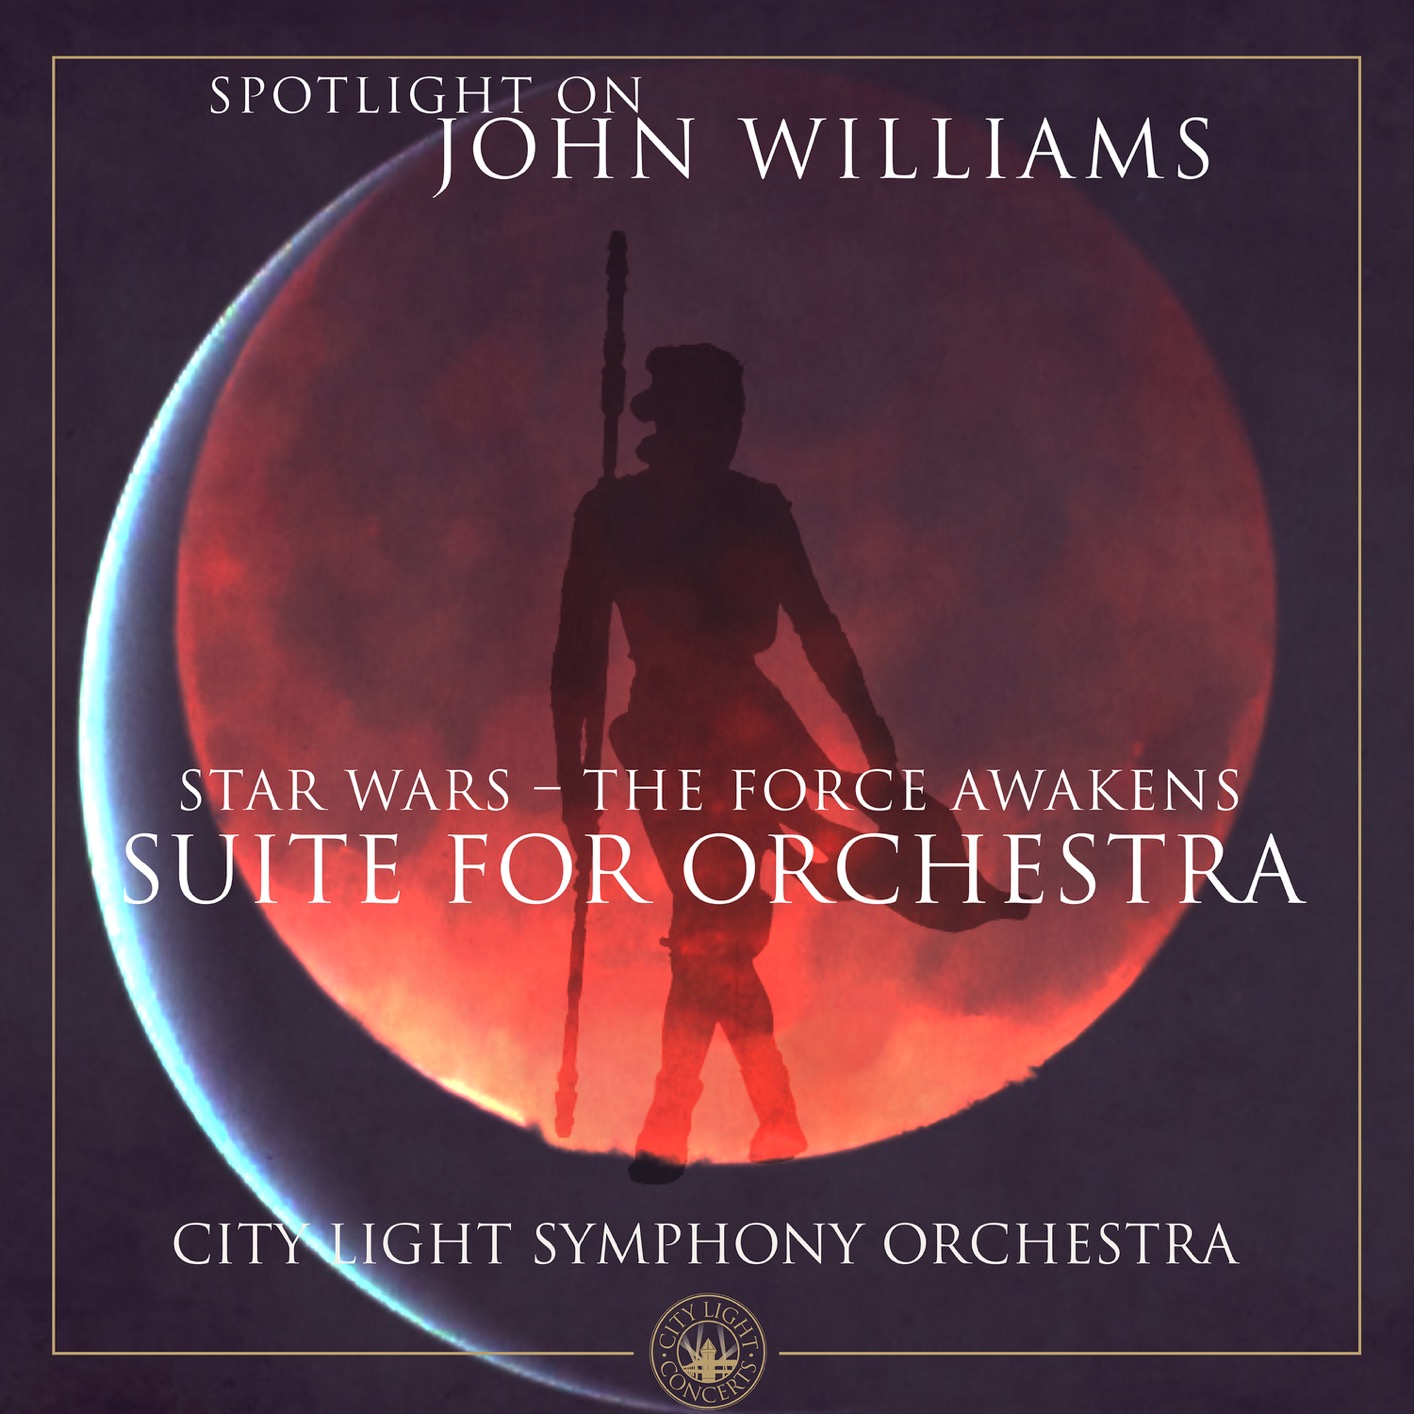 City Light Symphony Orchestra – Star Wars: The Force Awakens (Suite for Orchestra) (2021) [FLAC 24bit/88,2kHz]